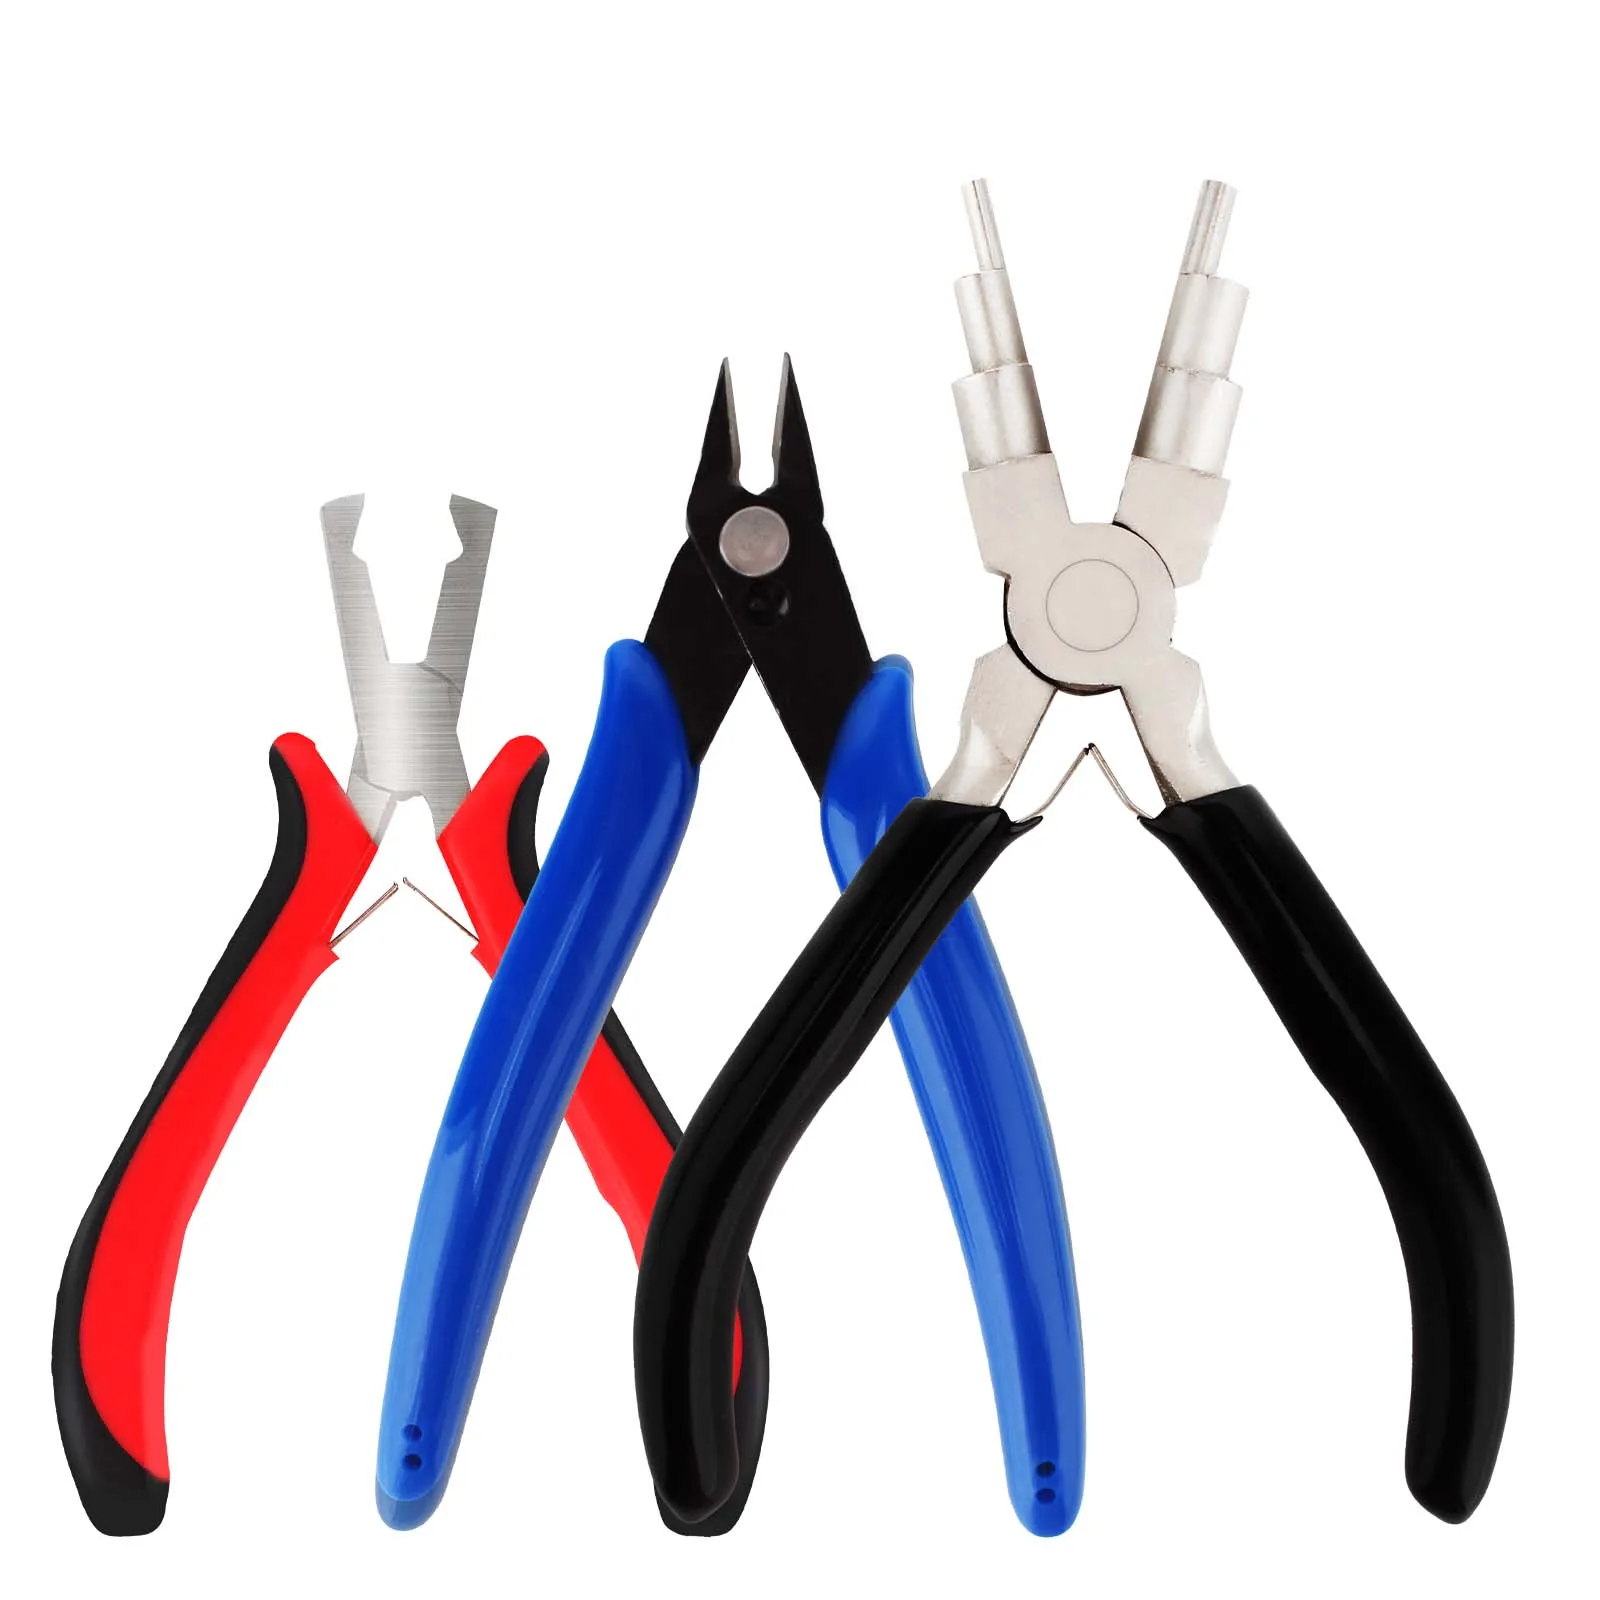 Wire Bending Pliers Consistently Make Up To 6 Size Loops & Jump Rings,End Nipper,Cutting Pliers for Jewelry Making jewelry display stand tray tree storage racks earrings necklaces rings jewelry boxes case desktop organizer holder make up decor